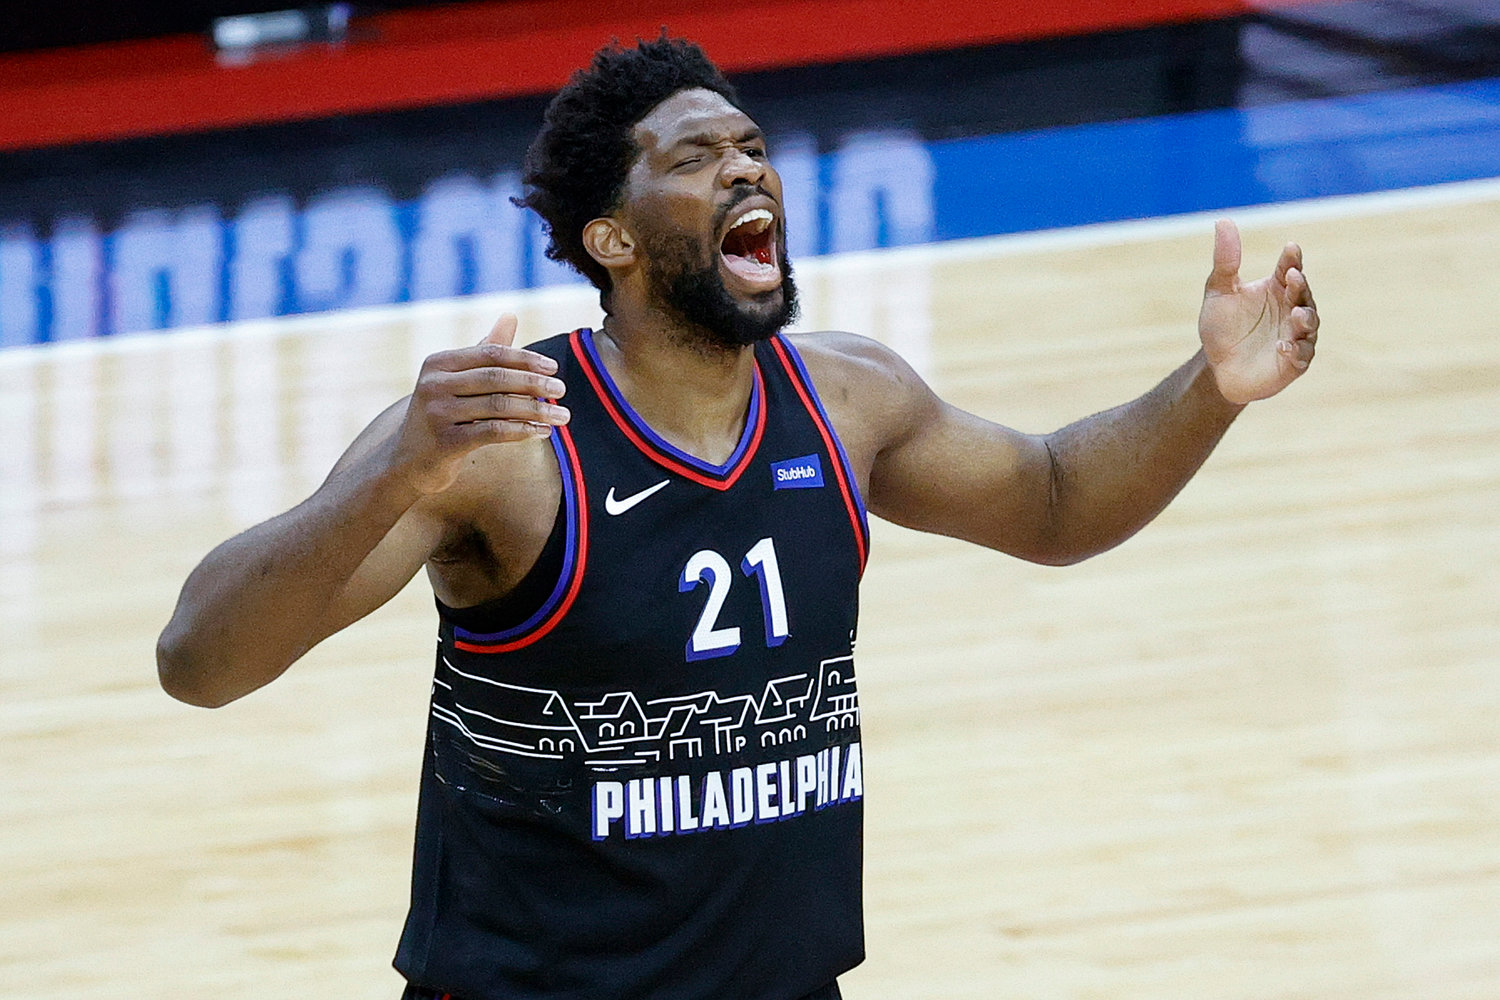 Joel Embiid of the Philadelphia 76ers celebrates during the third quarter against the Washington Wizards during Game 2 of the Eastern Conference first-round series at Wells Fargo Center in Philadelphia on May 26, 2021. (Tim Nwachukwu/Getty Images/TNS)